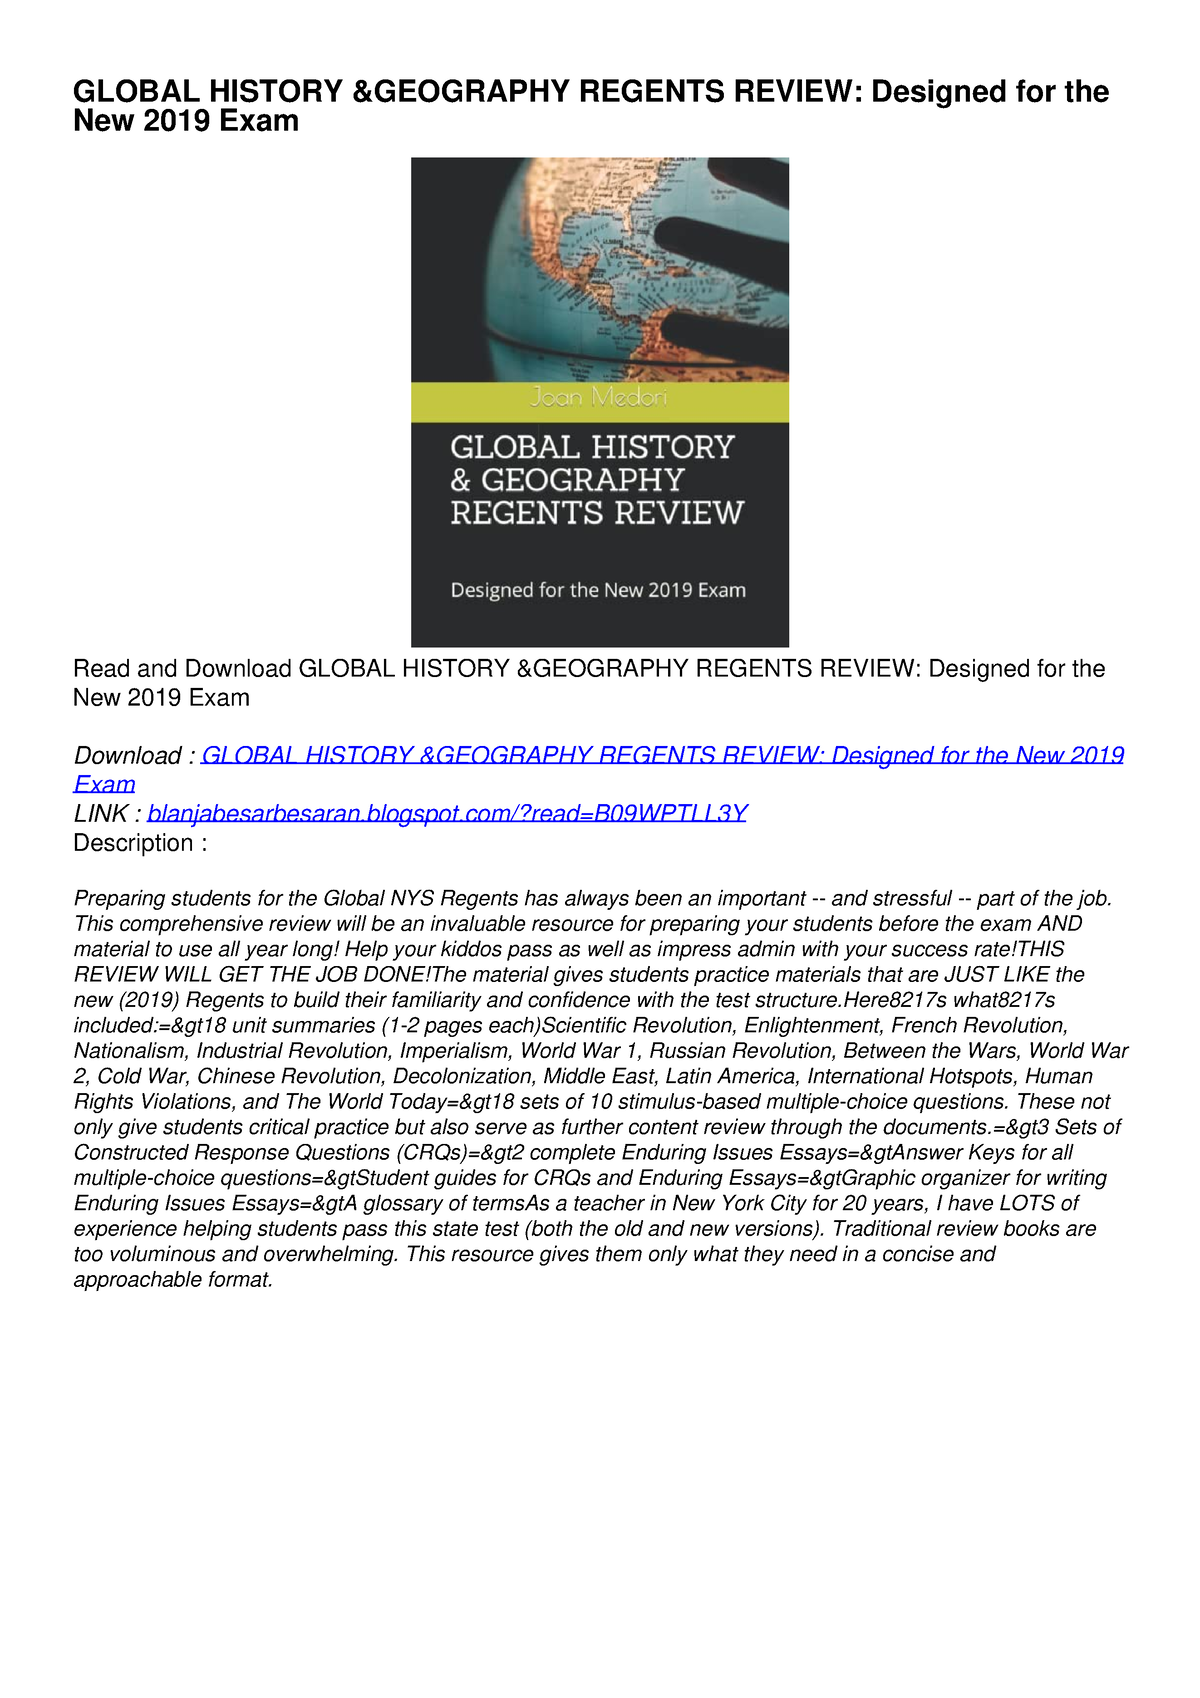 READ/DOWNLOAD GLOBAL HISTORY GEOGRAPHY REGENTS REVIEW Designed for the